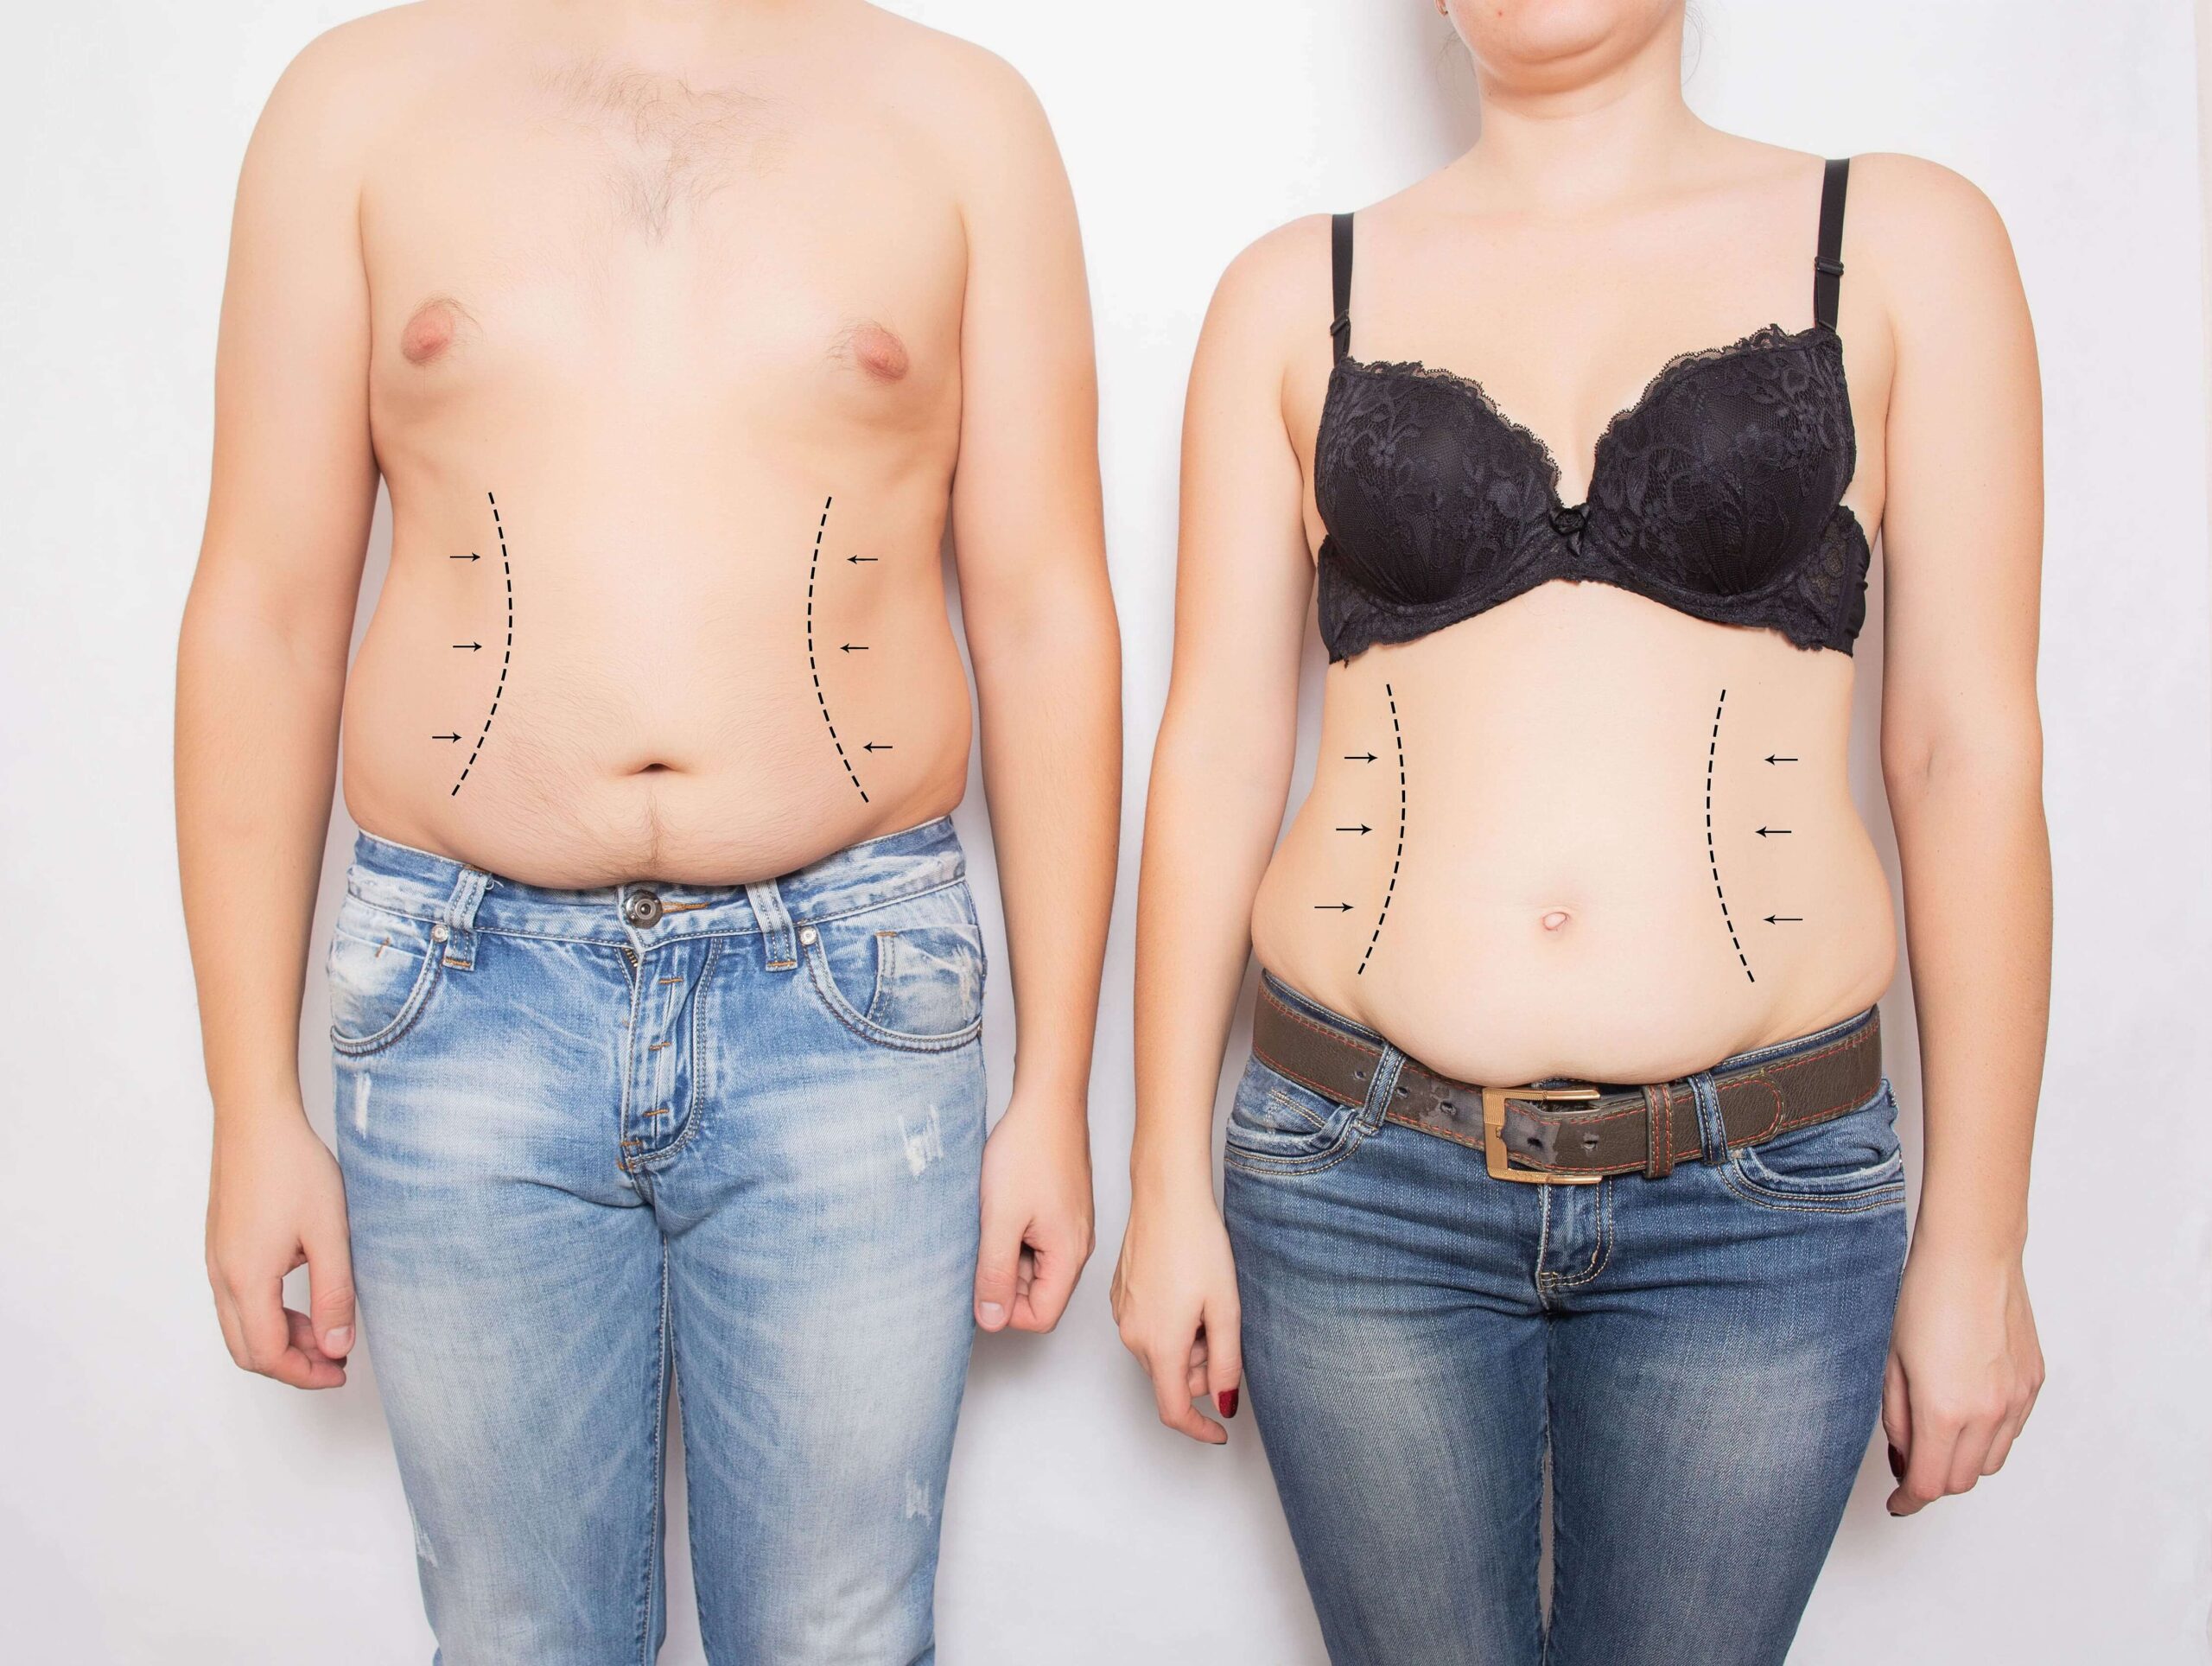 Body Contouring after Major Weight Loss - Pure Aesthetics